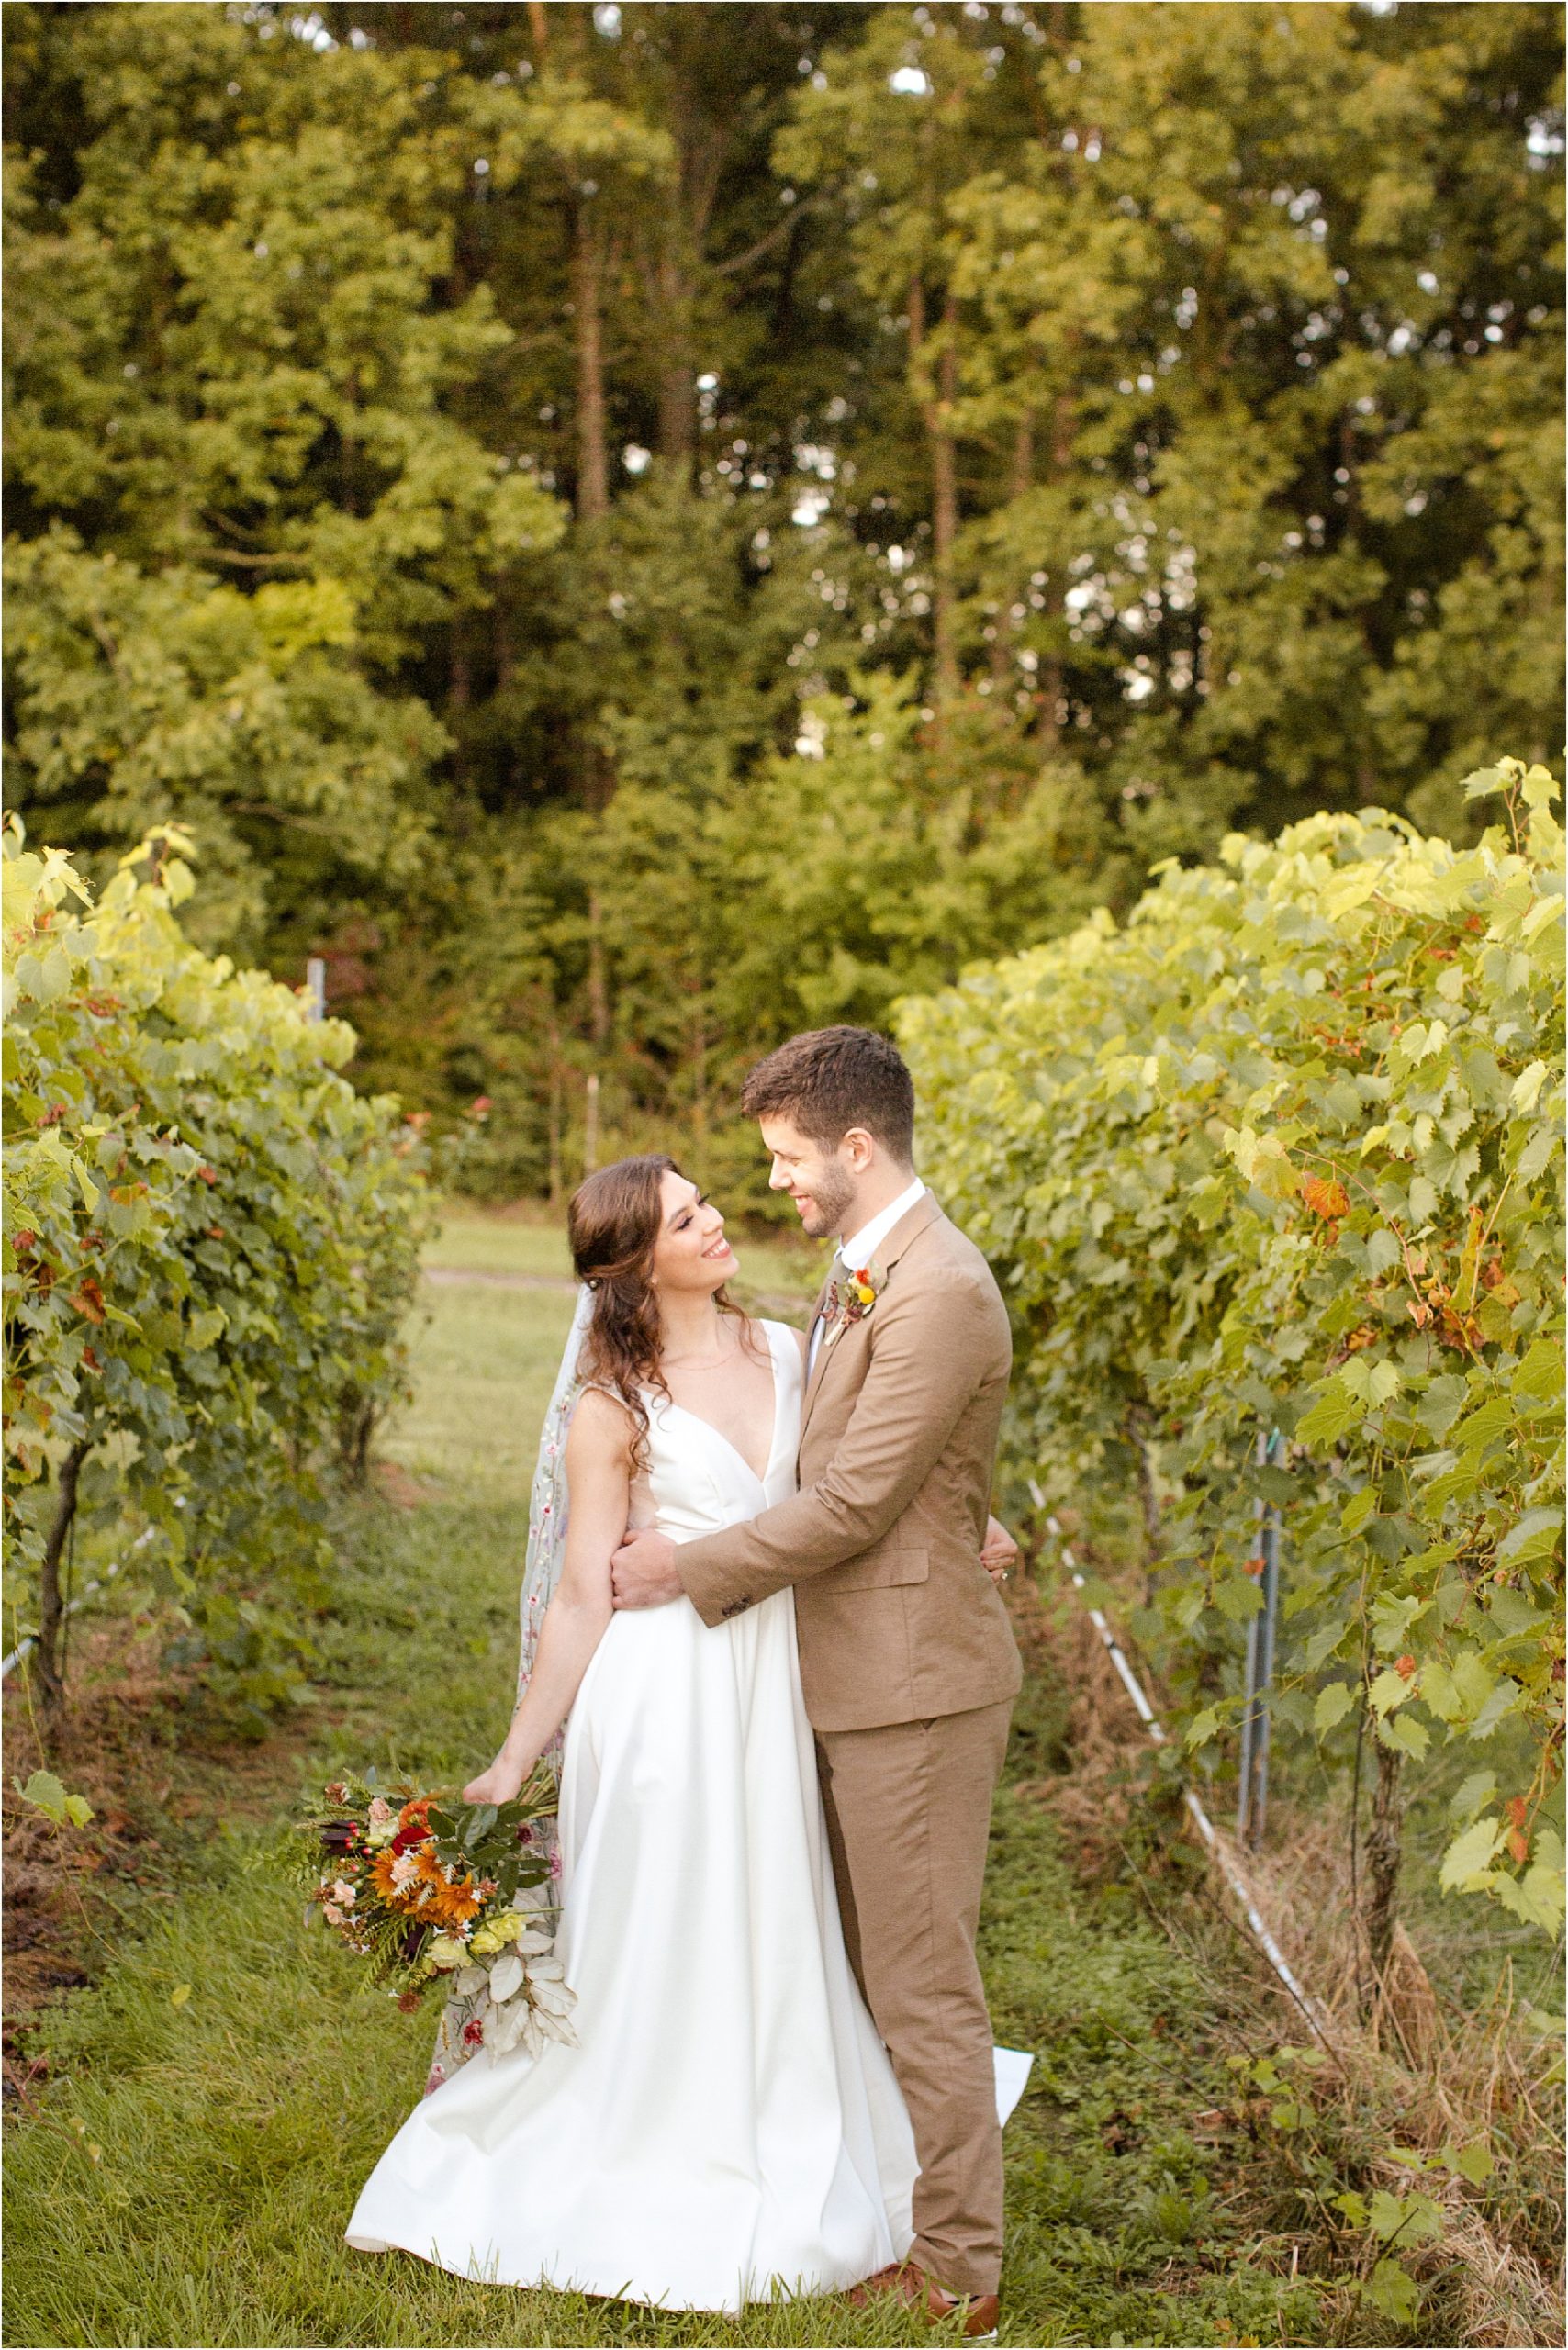 Couple hugs in a vineyard after their wedding ceremony in Greenville